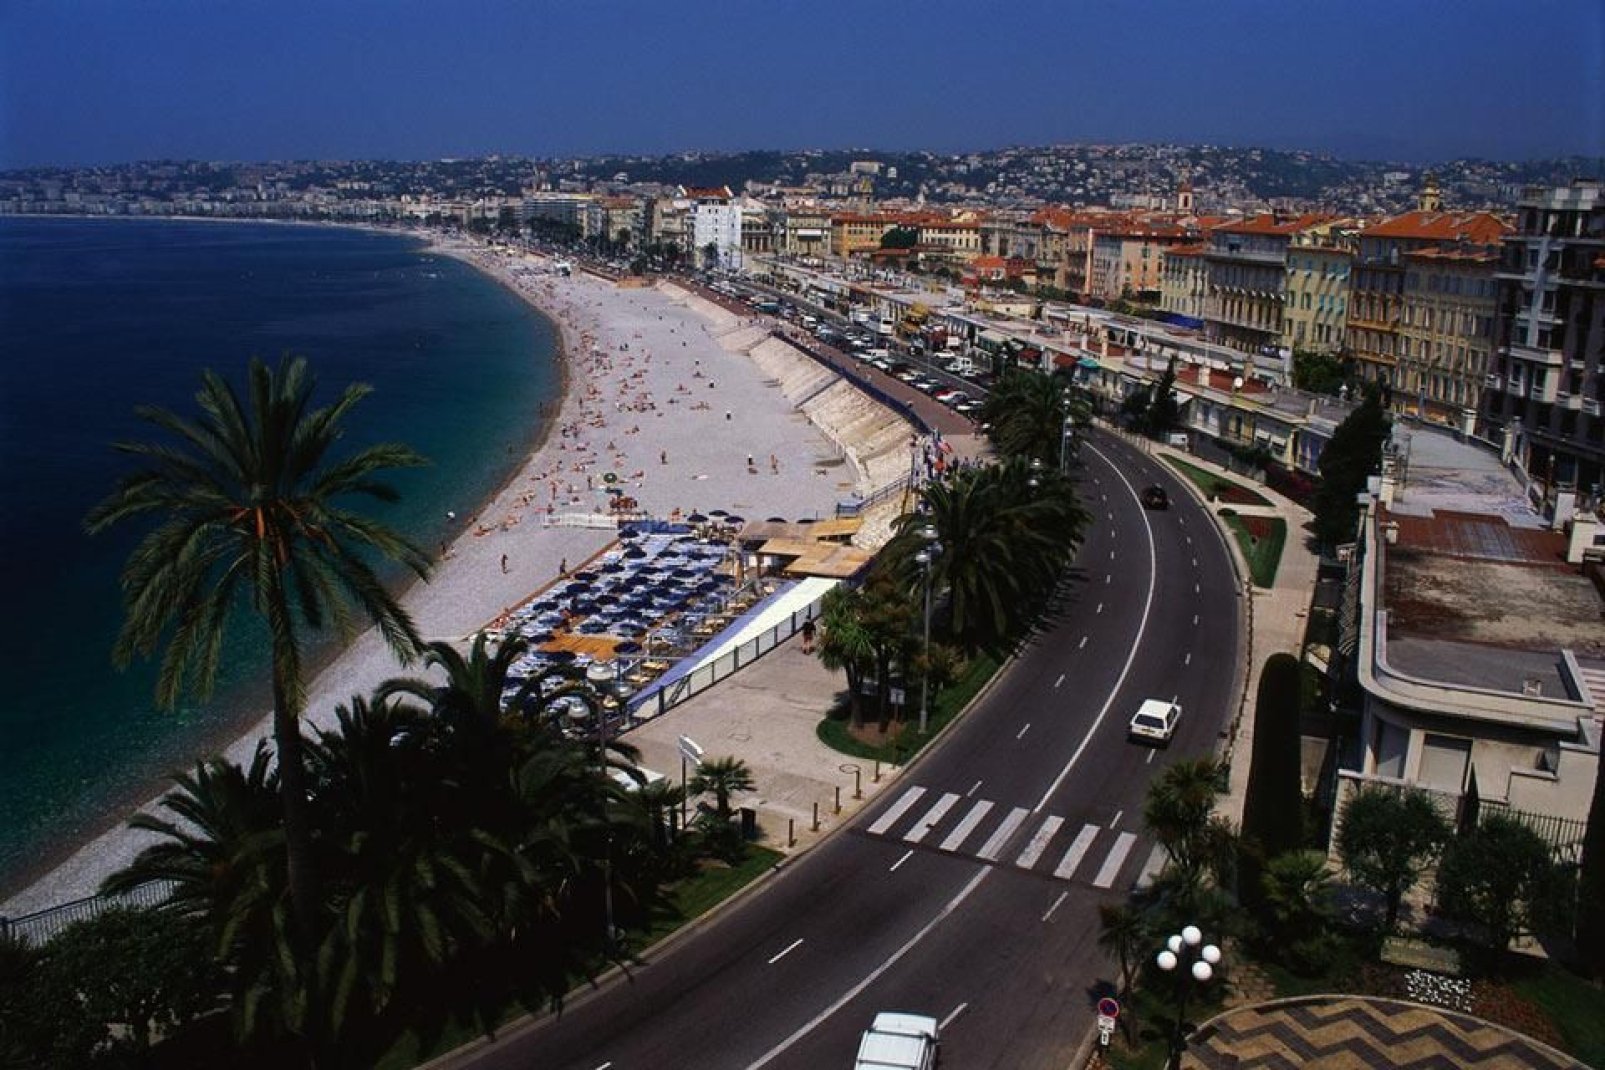 What would the city be without its famous 'Promenade des Anglais', or quite simply 'prom'? Visiting this 4 mile long coast road is a rite of passage when in Nice.